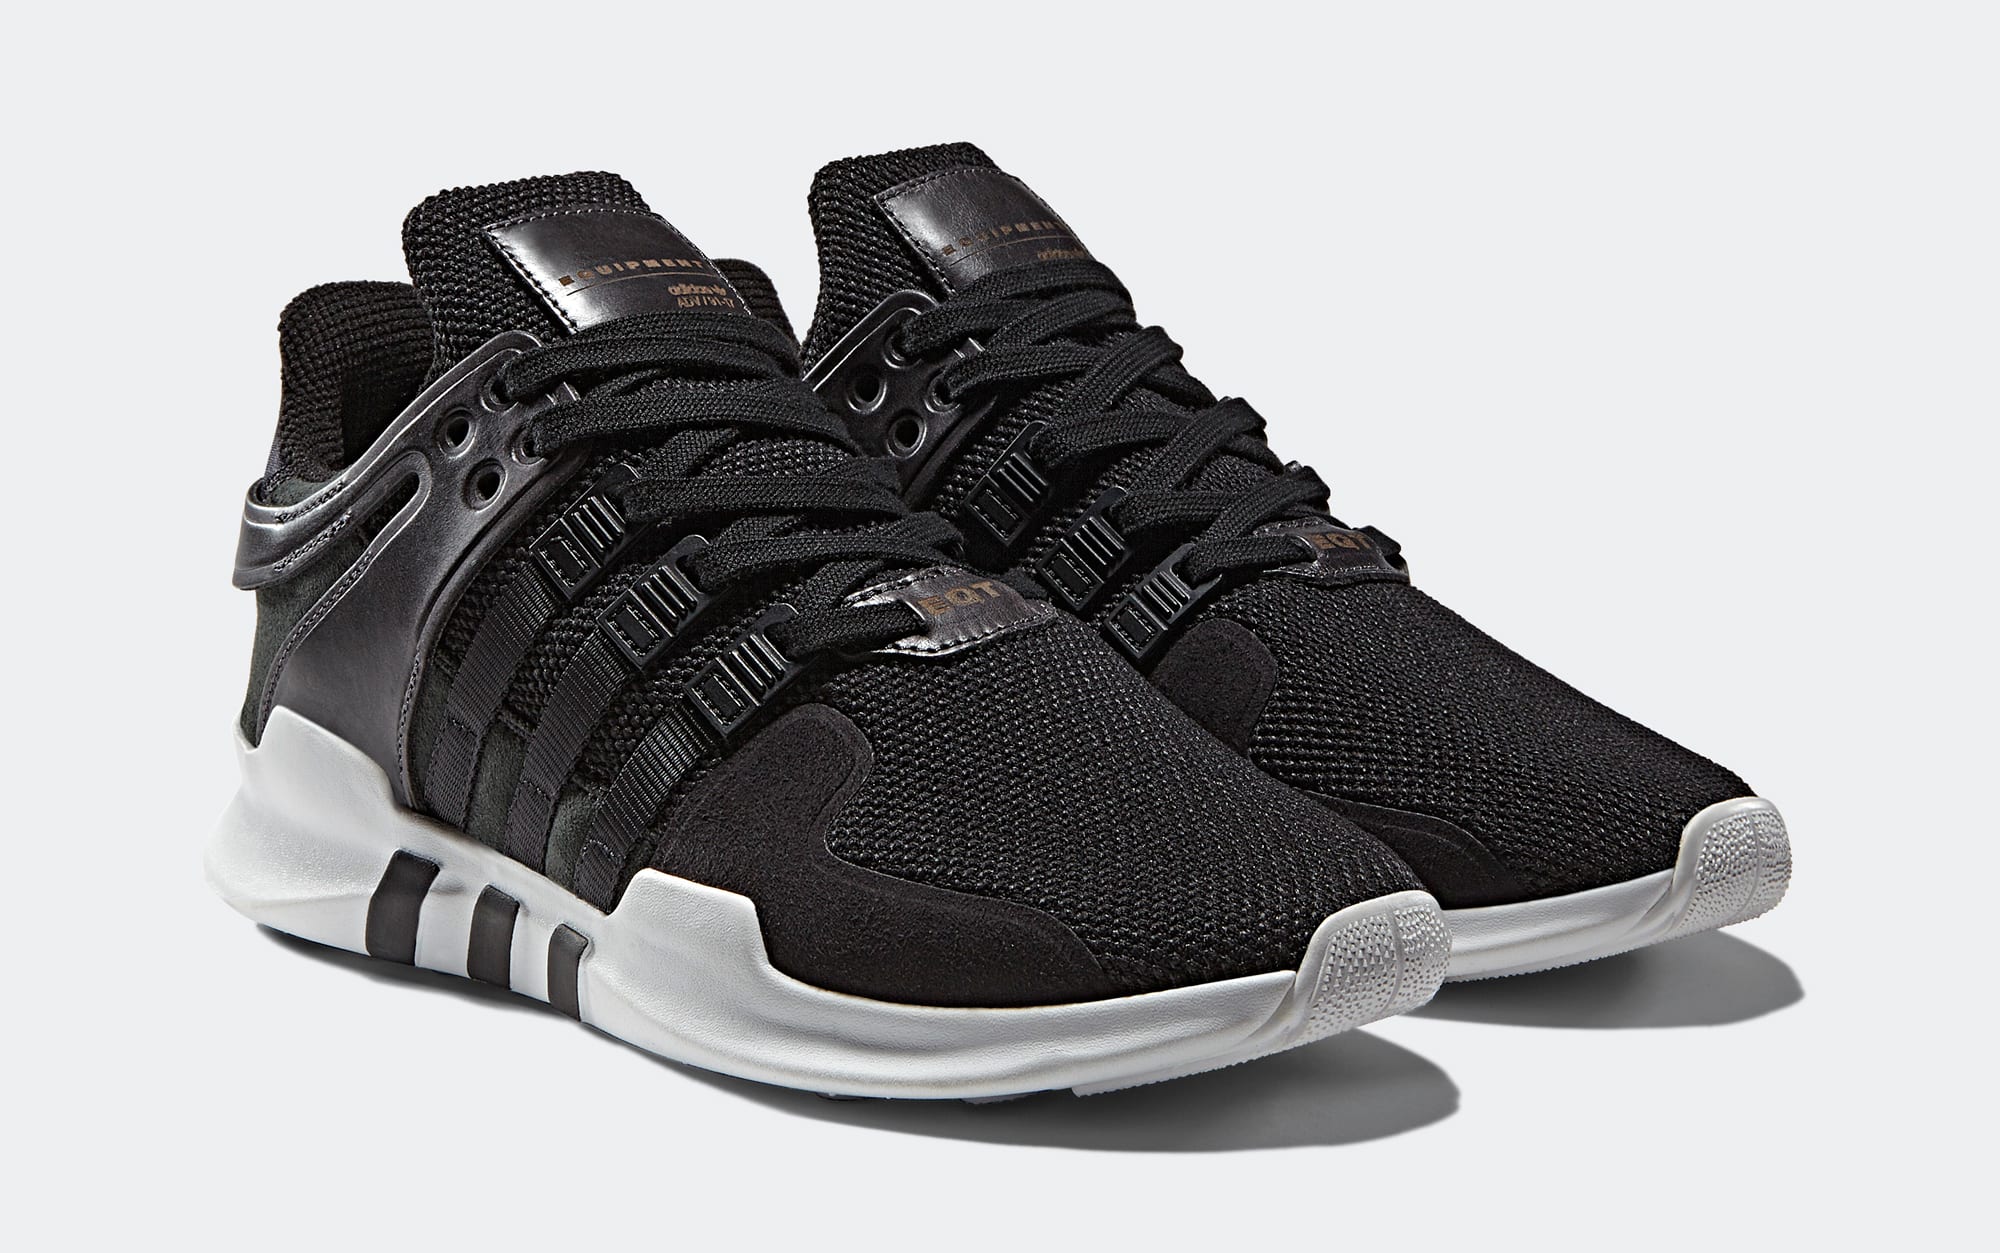 Adidas EQT Milled Leather Pack 3